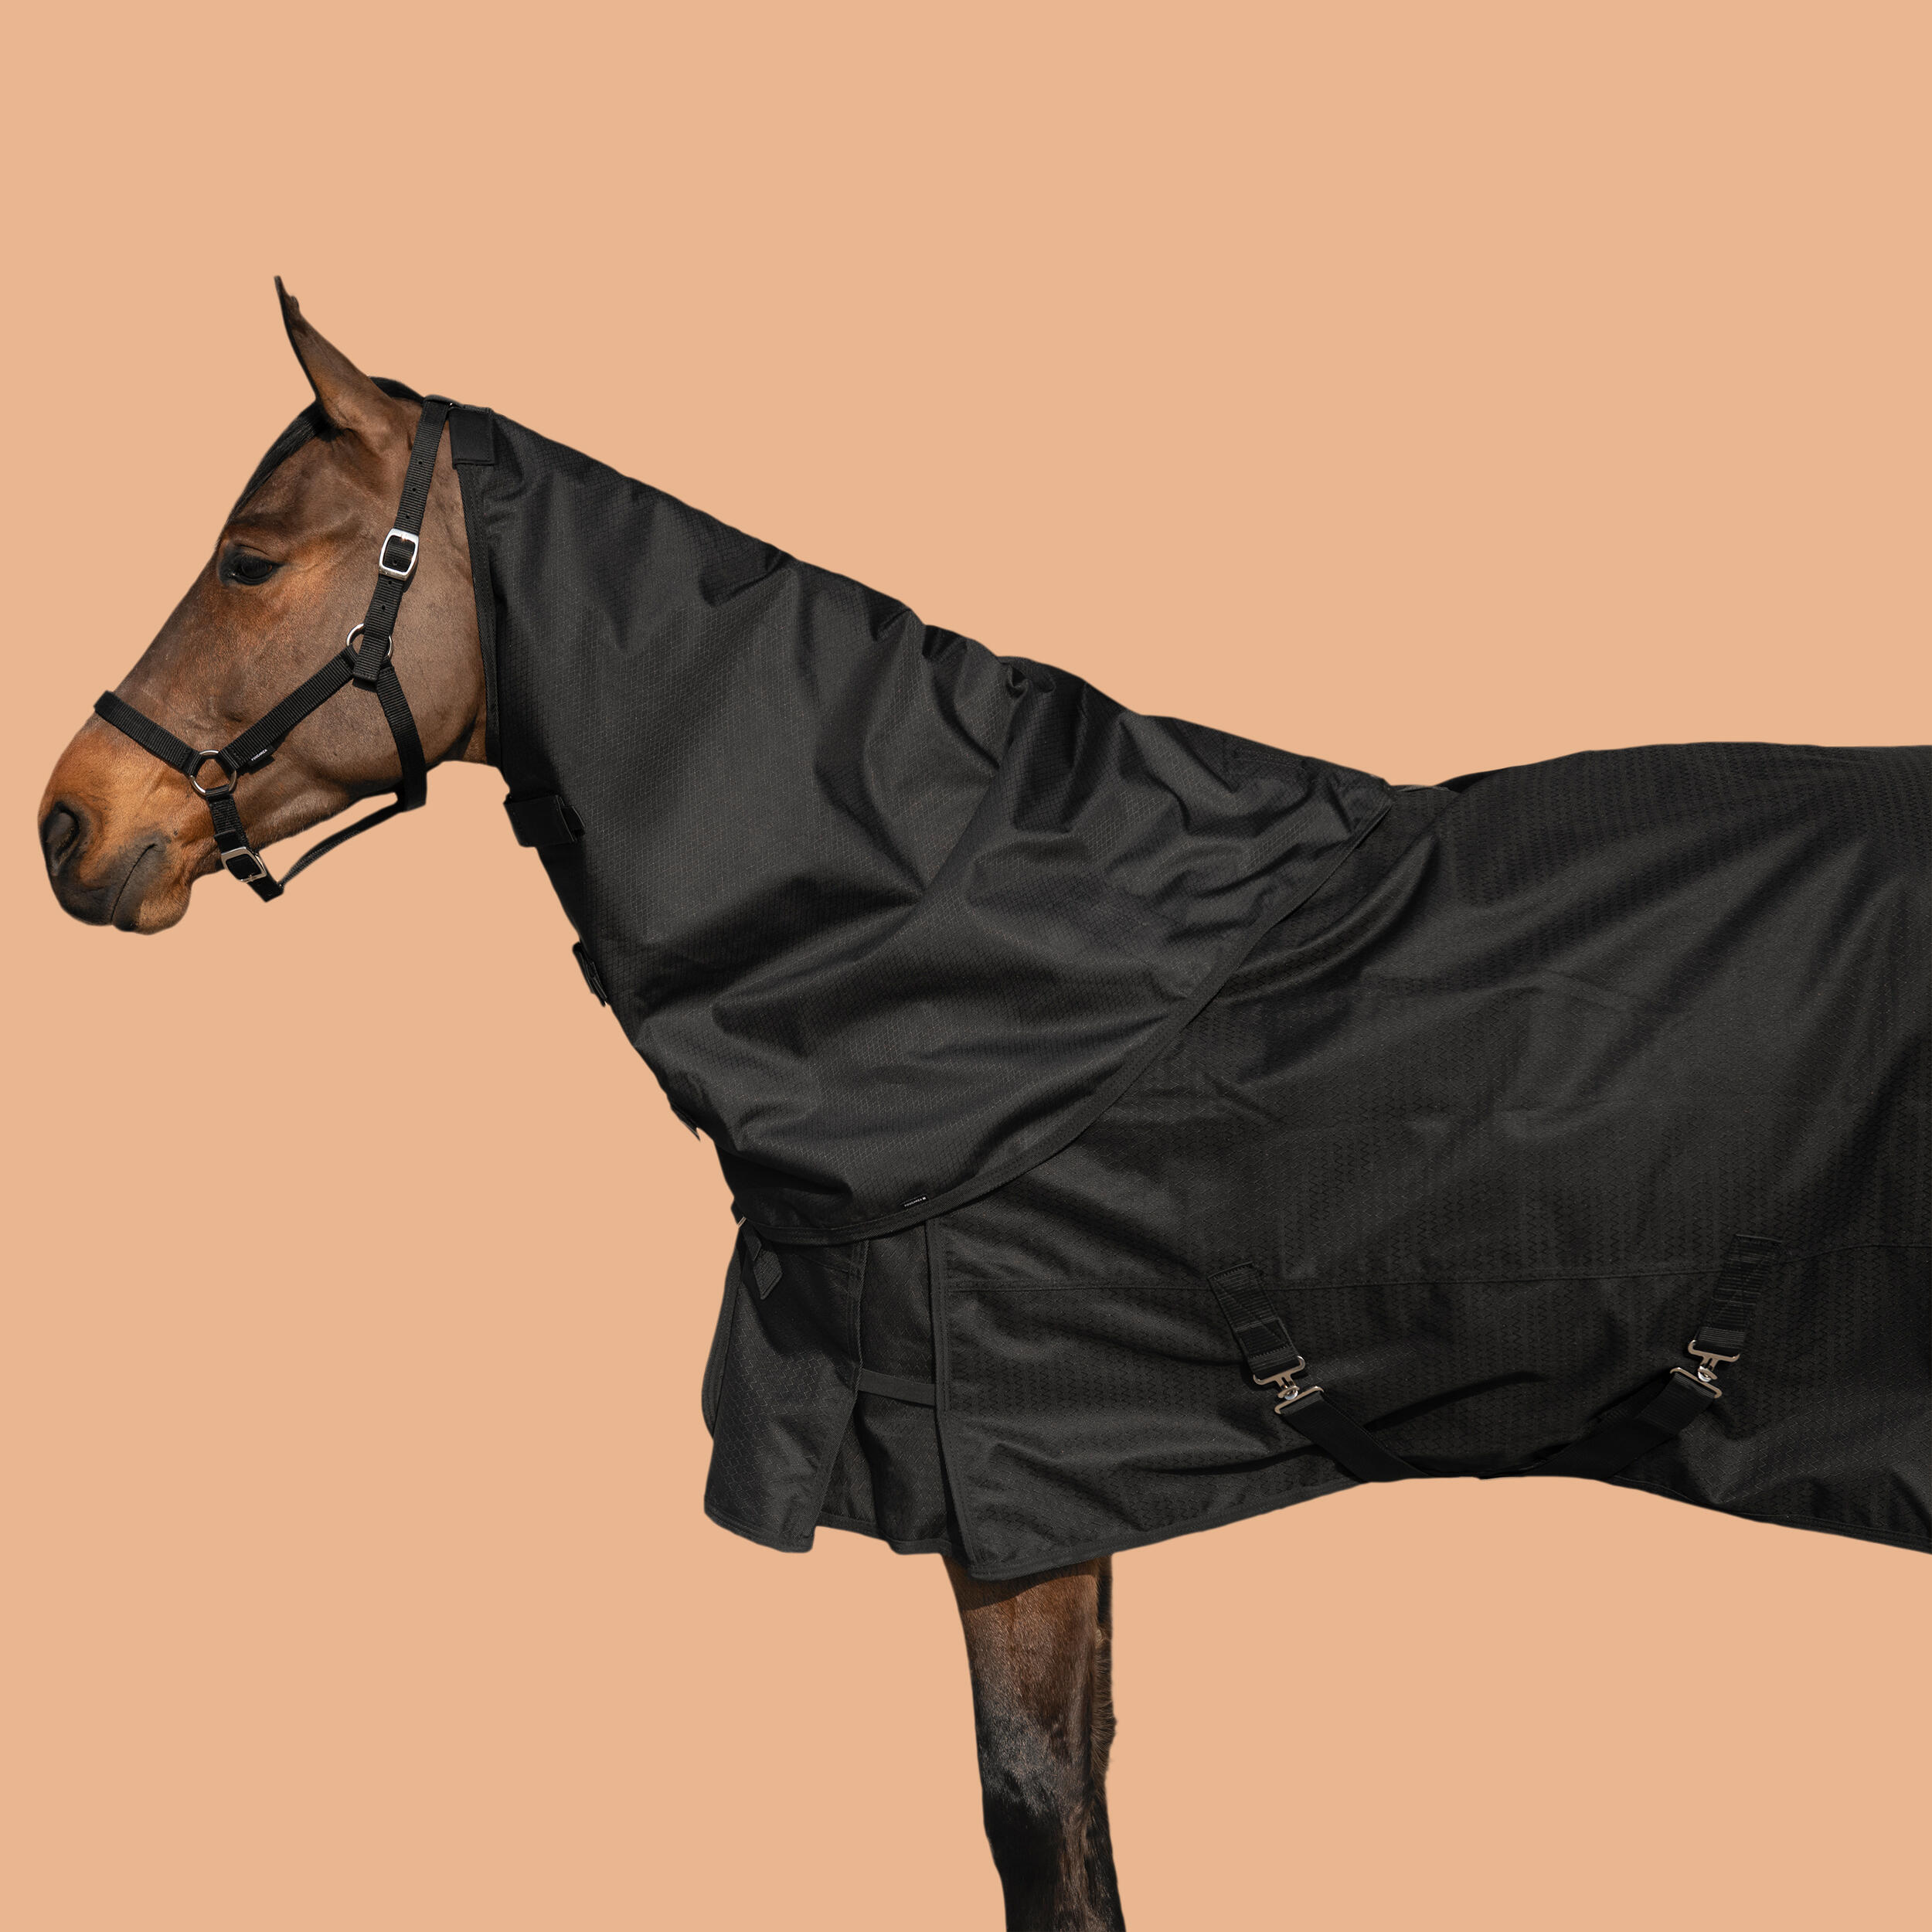 Horse Riding Waterproof Neck Cover Allweather Light - Black 1/7